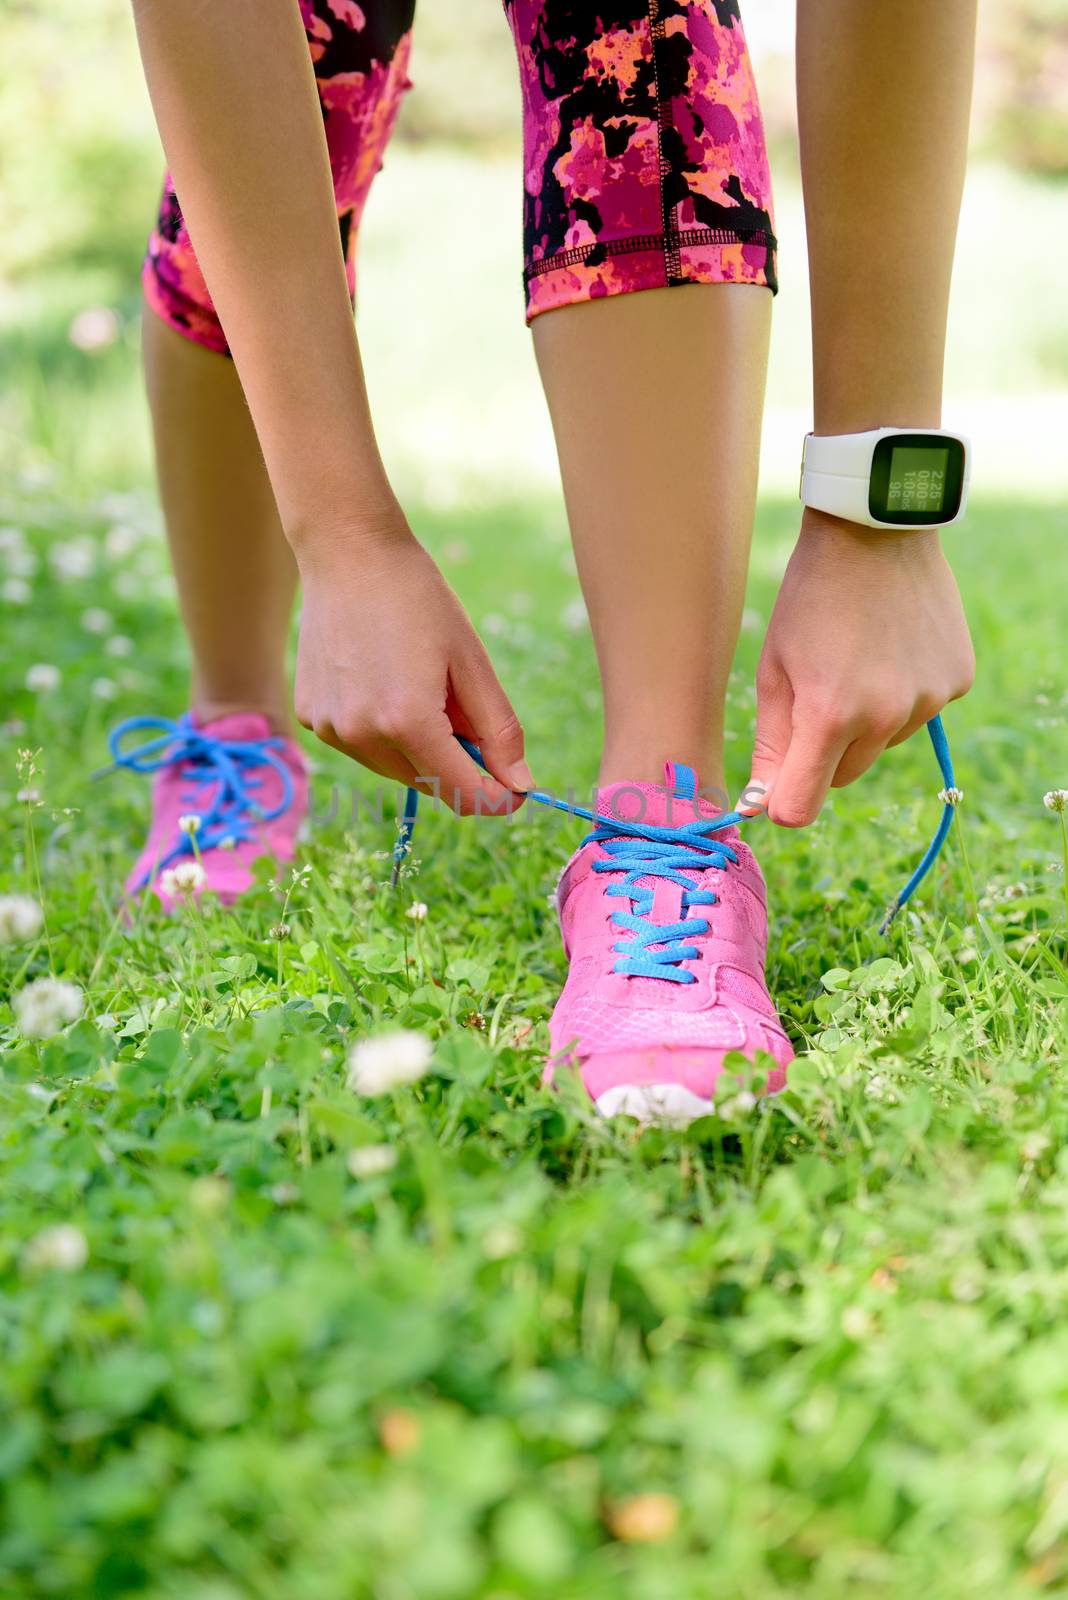 Weight loss - runner tying laces with smartwatch by Maridav